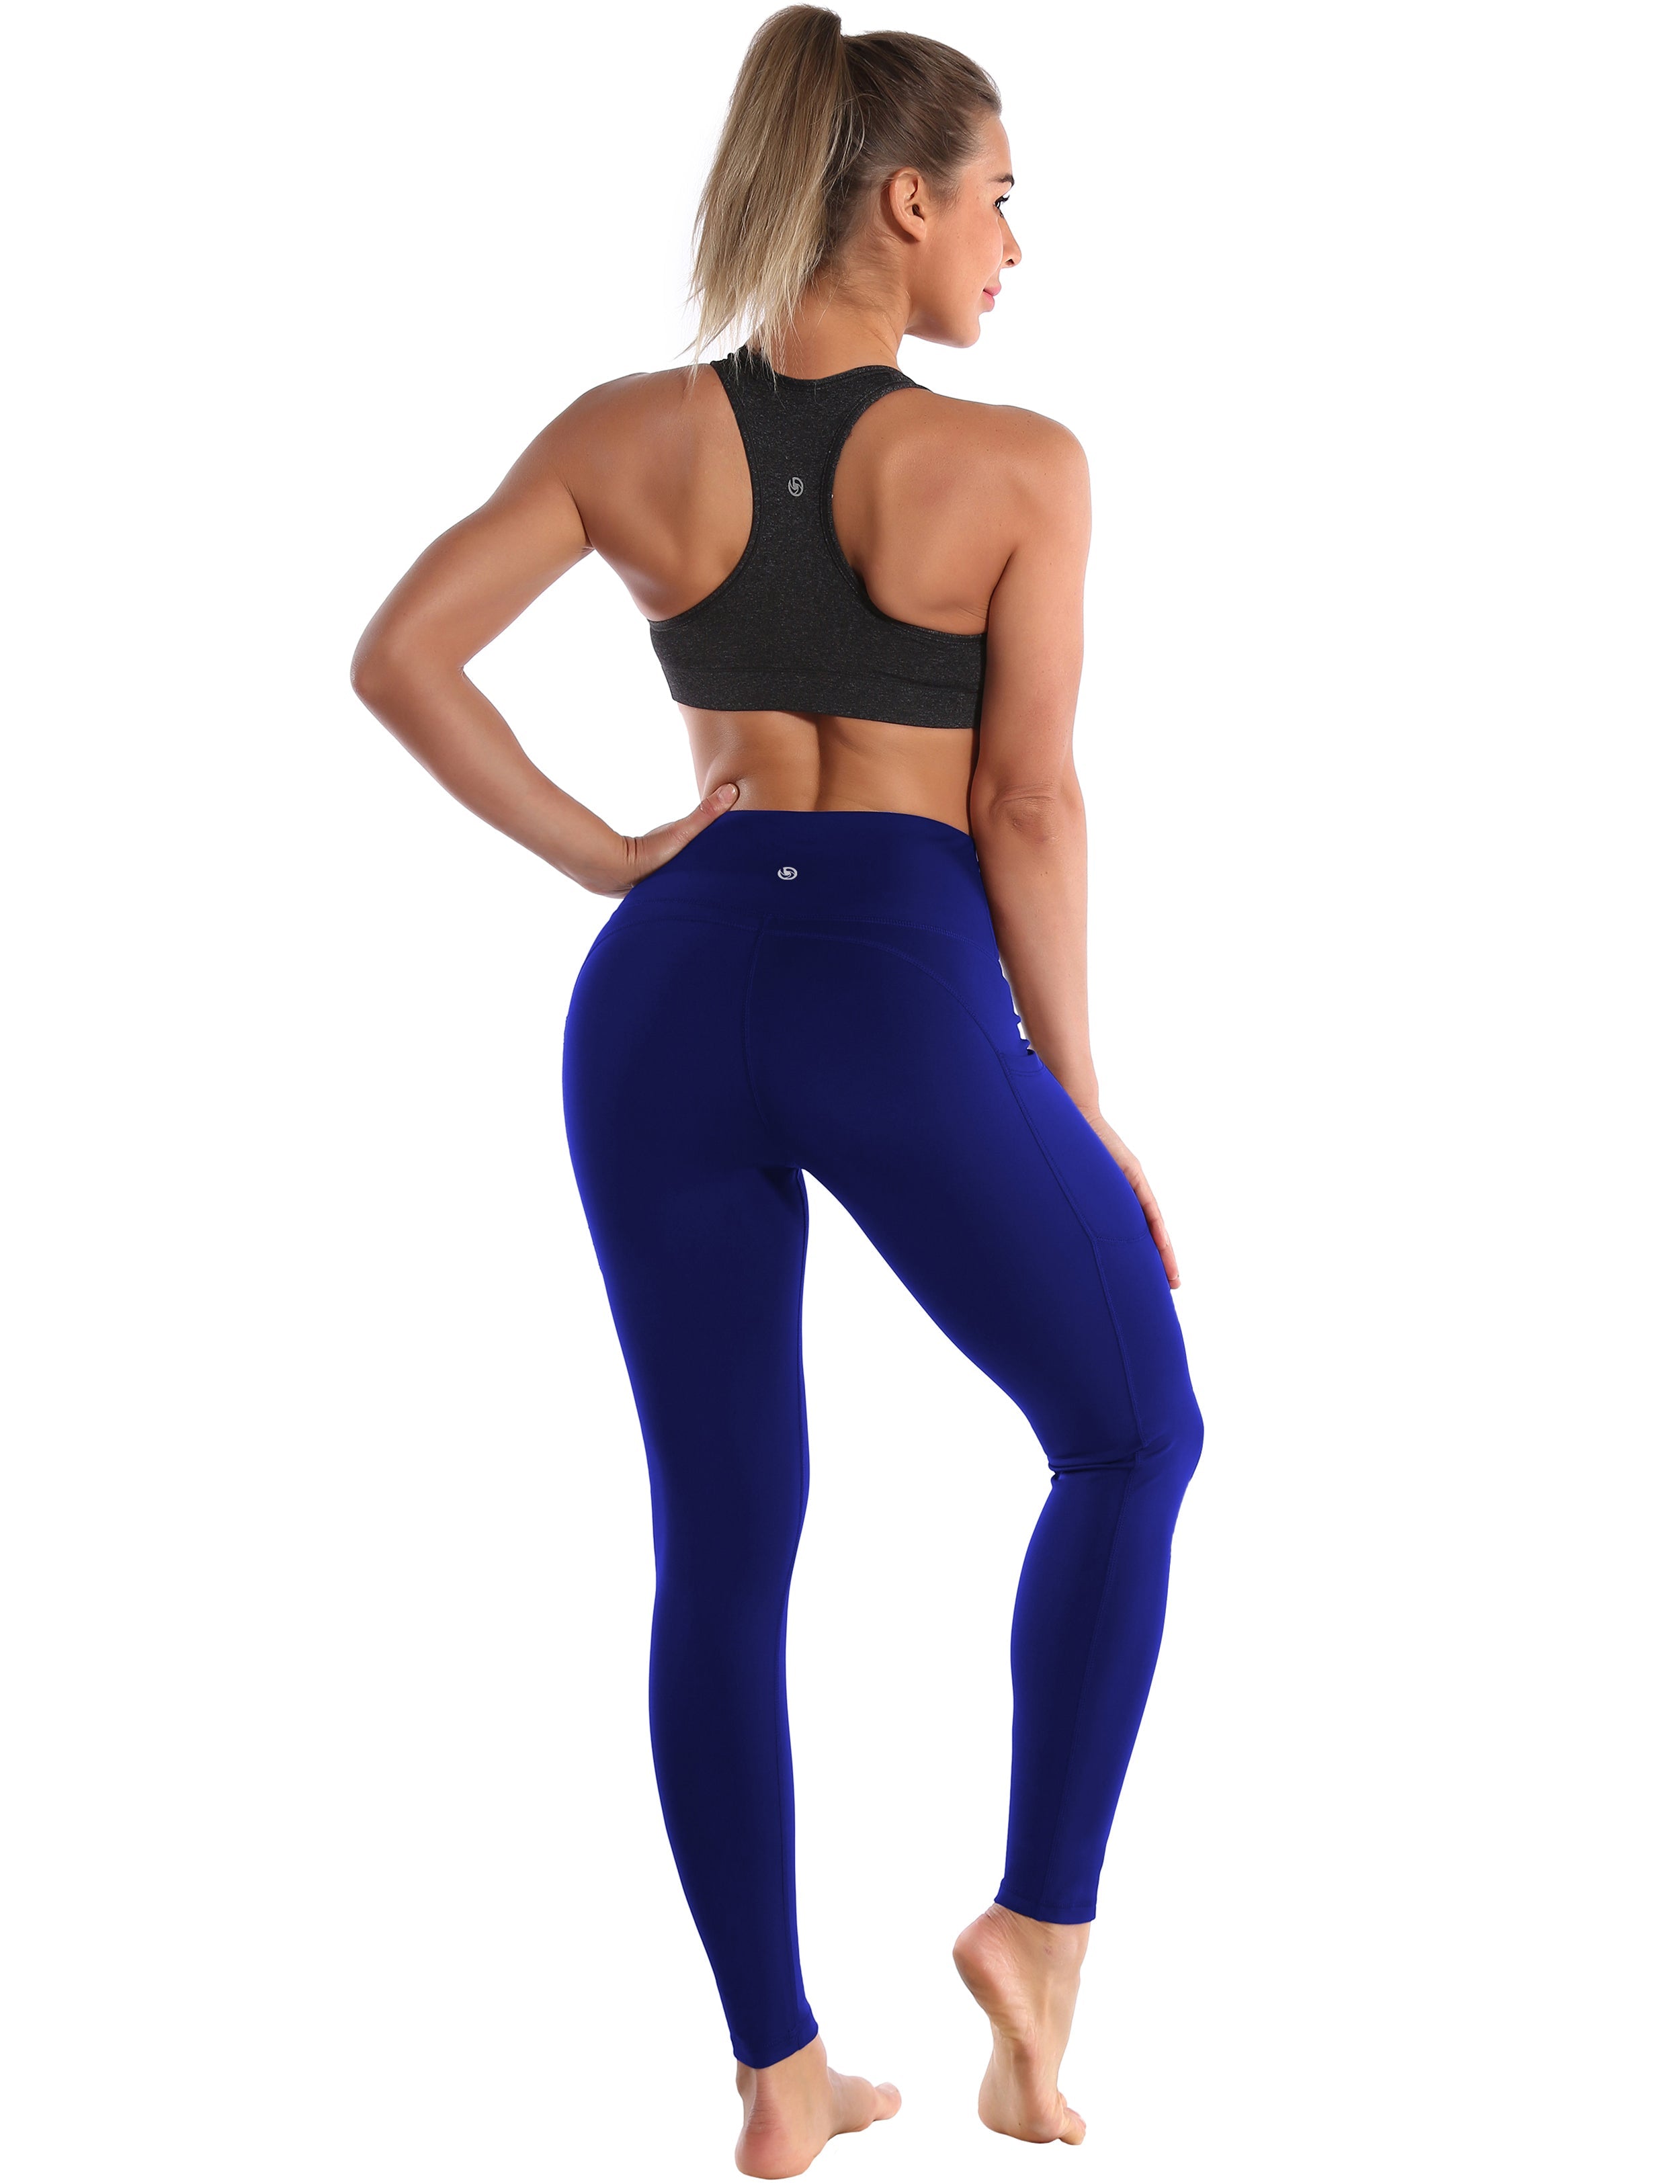 Hip Line Side Pockets Pilates Pants navy Sexy Hip Line Side Pockets 75%Nylon/25%Spandex Fabric doesn't attract lint easily 4-way stretch No see-through Moisture-wicking Tummy control Inner pocket Two lengths